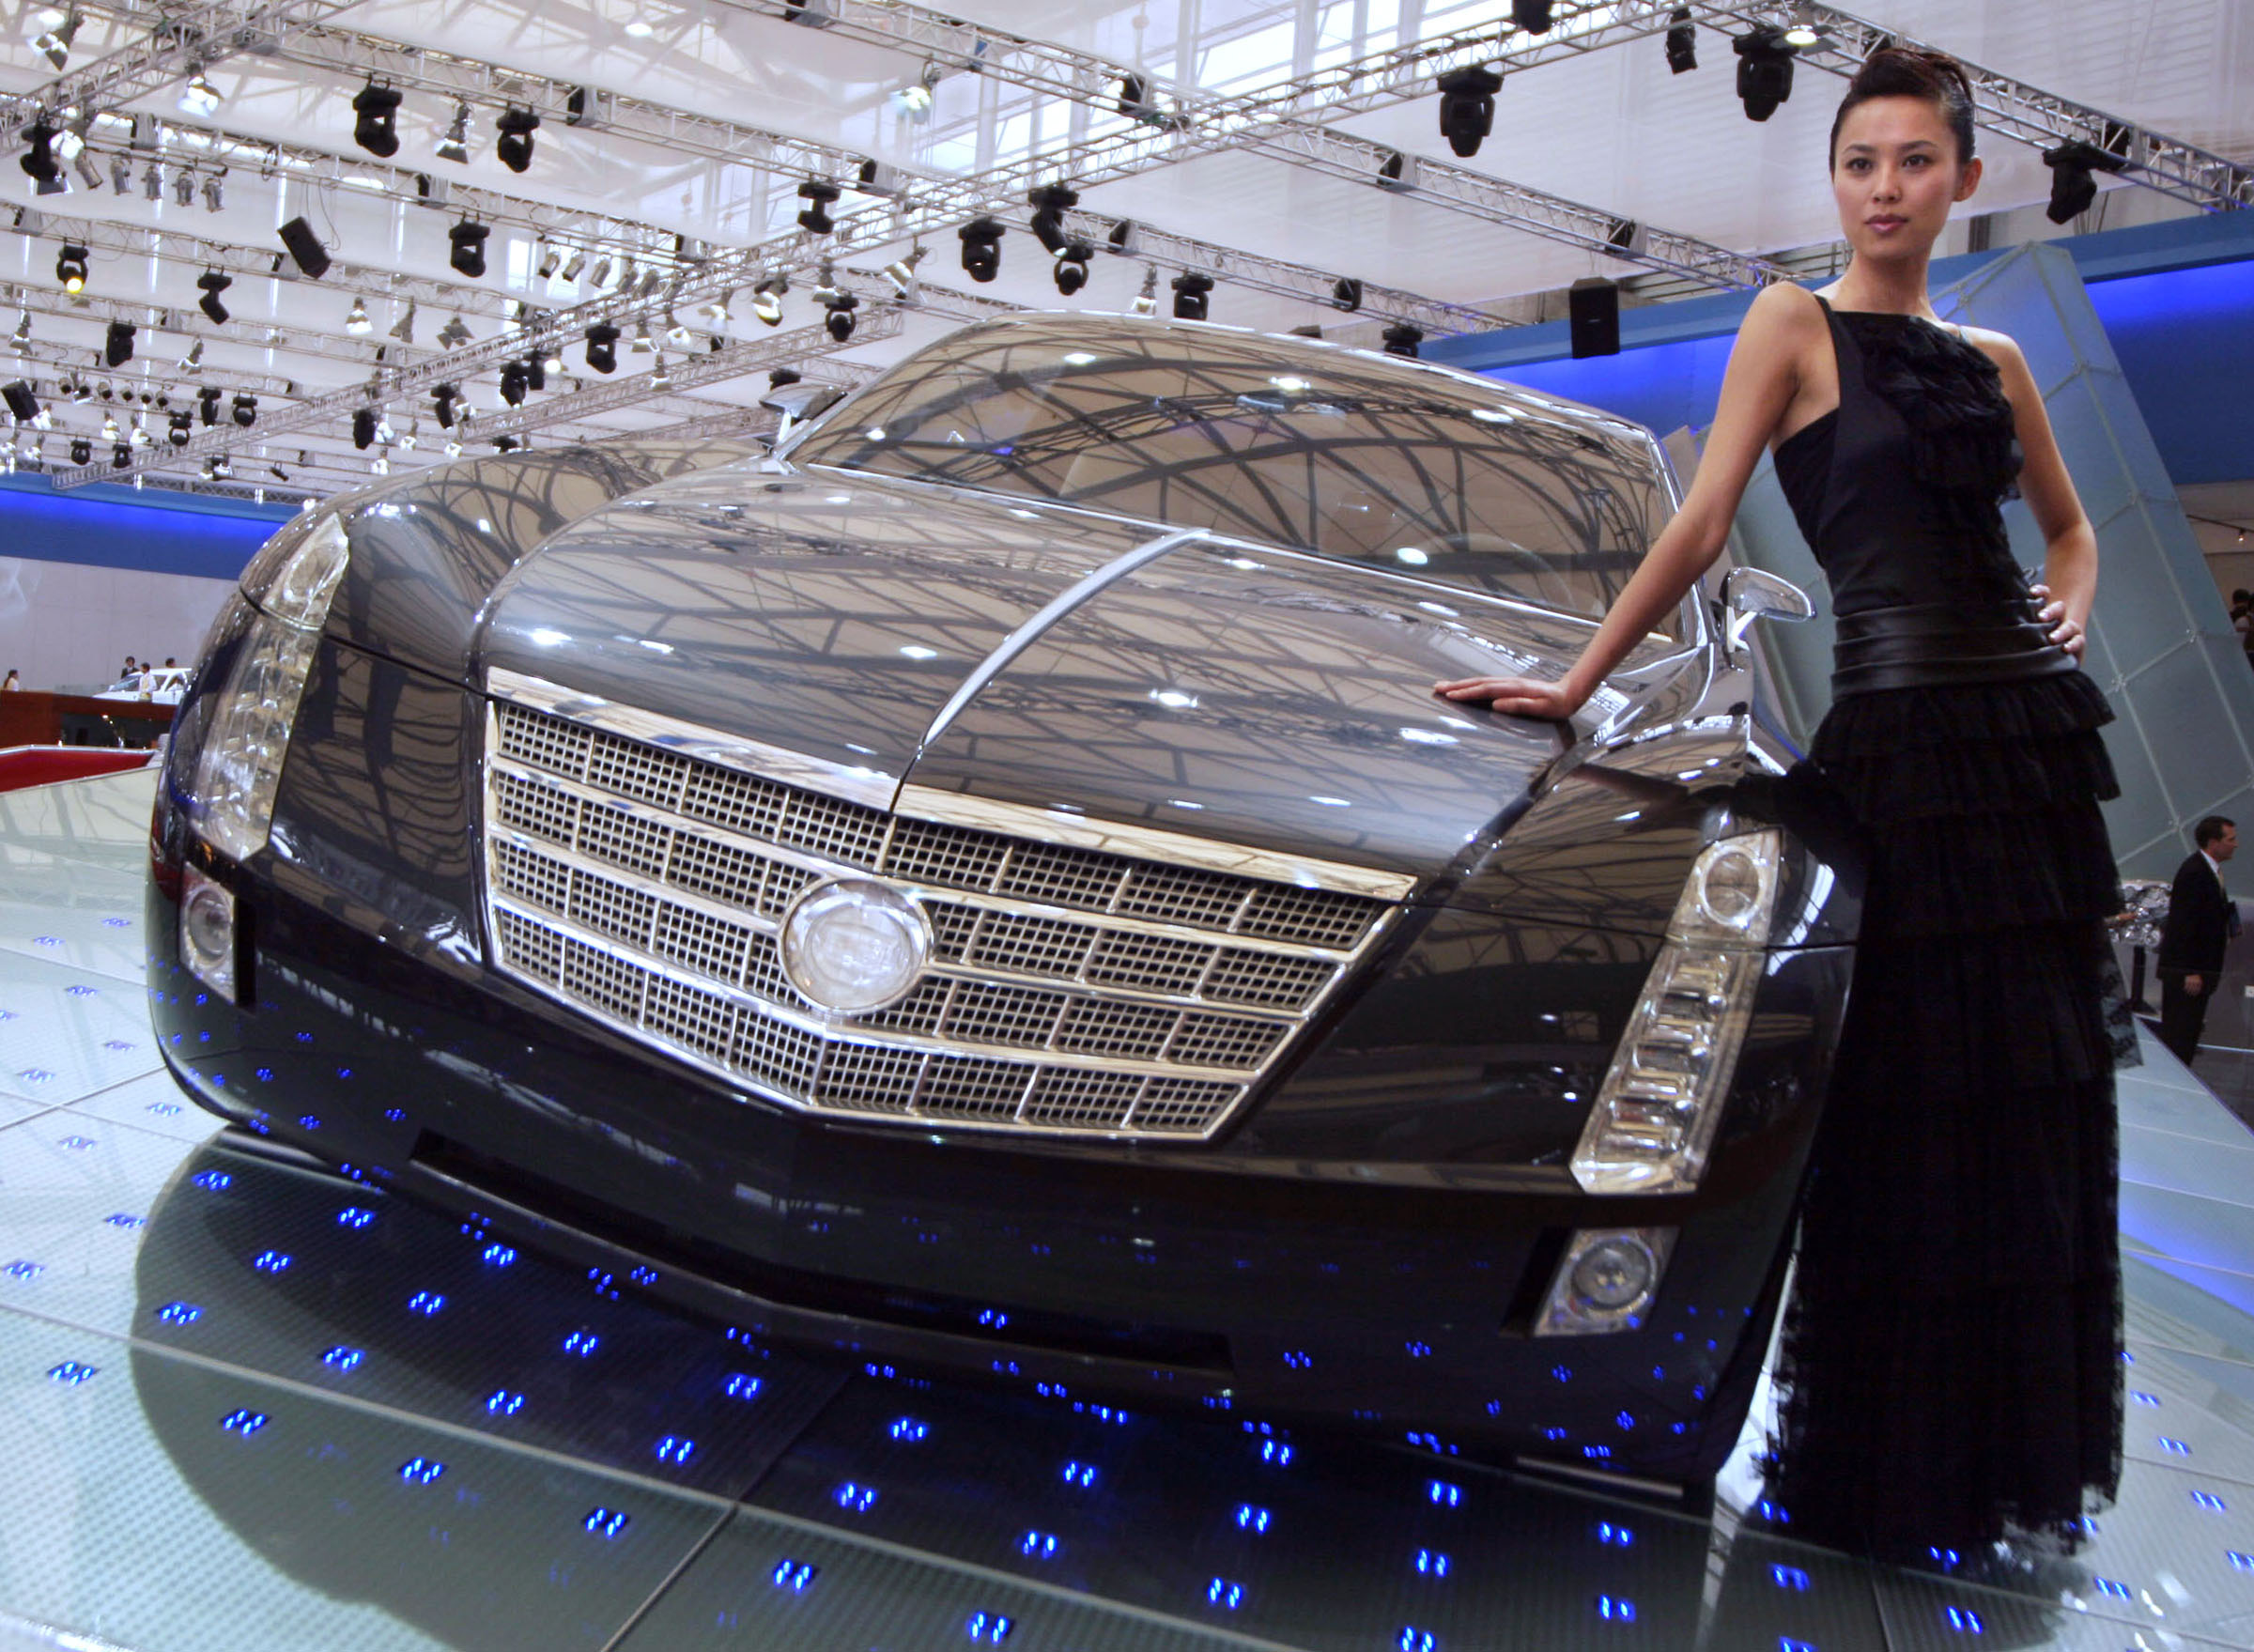 A Chinese model poses next to the Cadillac Sixteen concept vehicle at Auto 